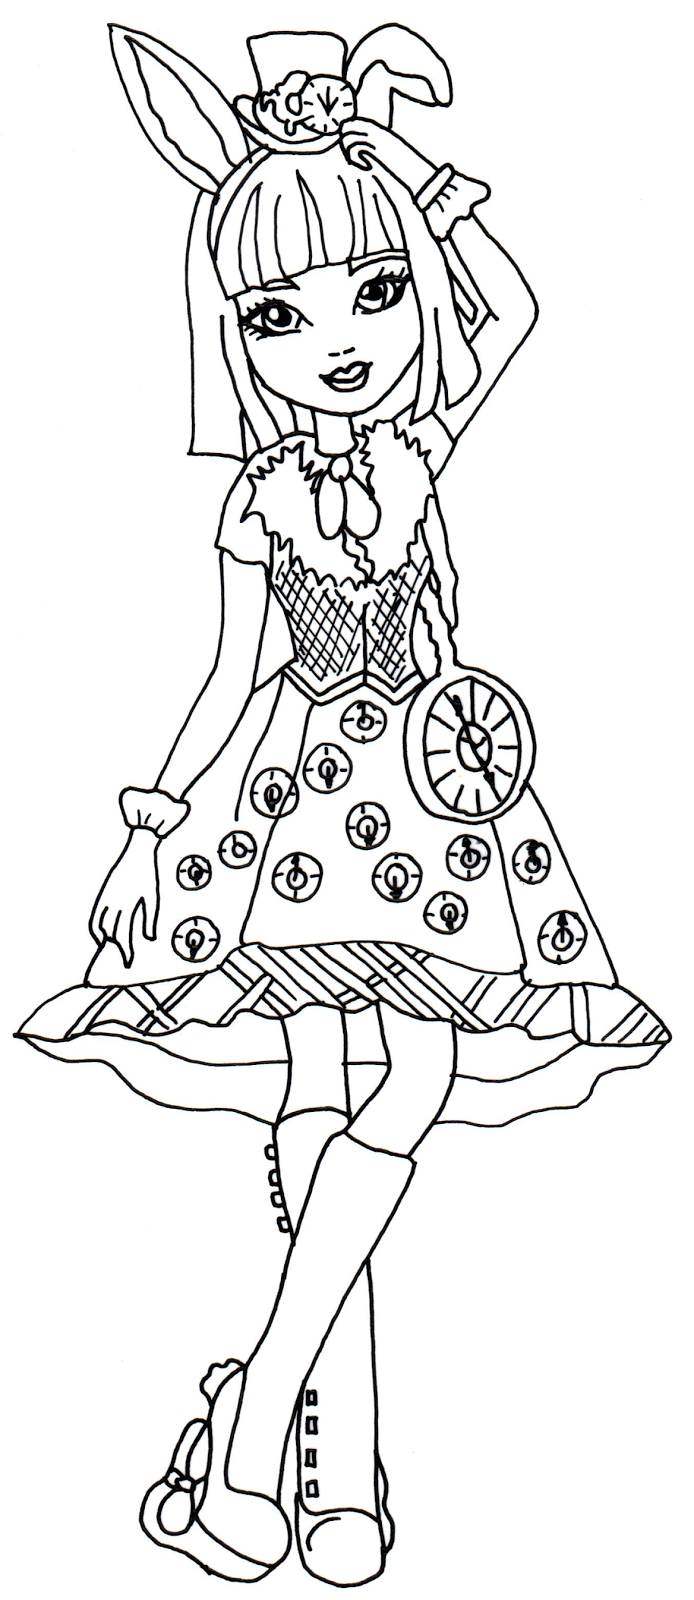 Bunny White Ever After High coloring page